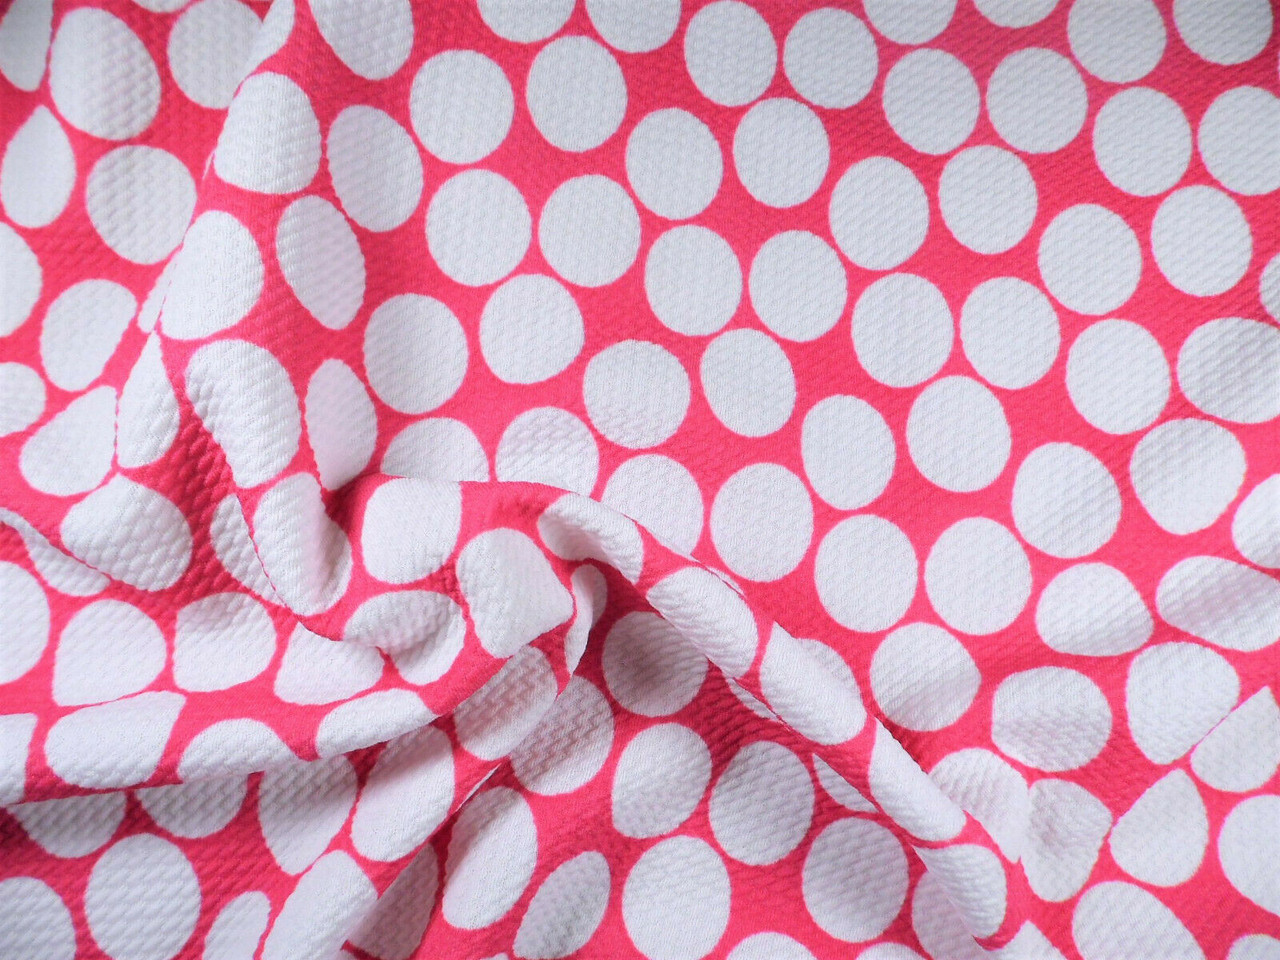 Bullet Printed Liverpool Textured Fabric Stretch Pink Big White Polka Dot N40